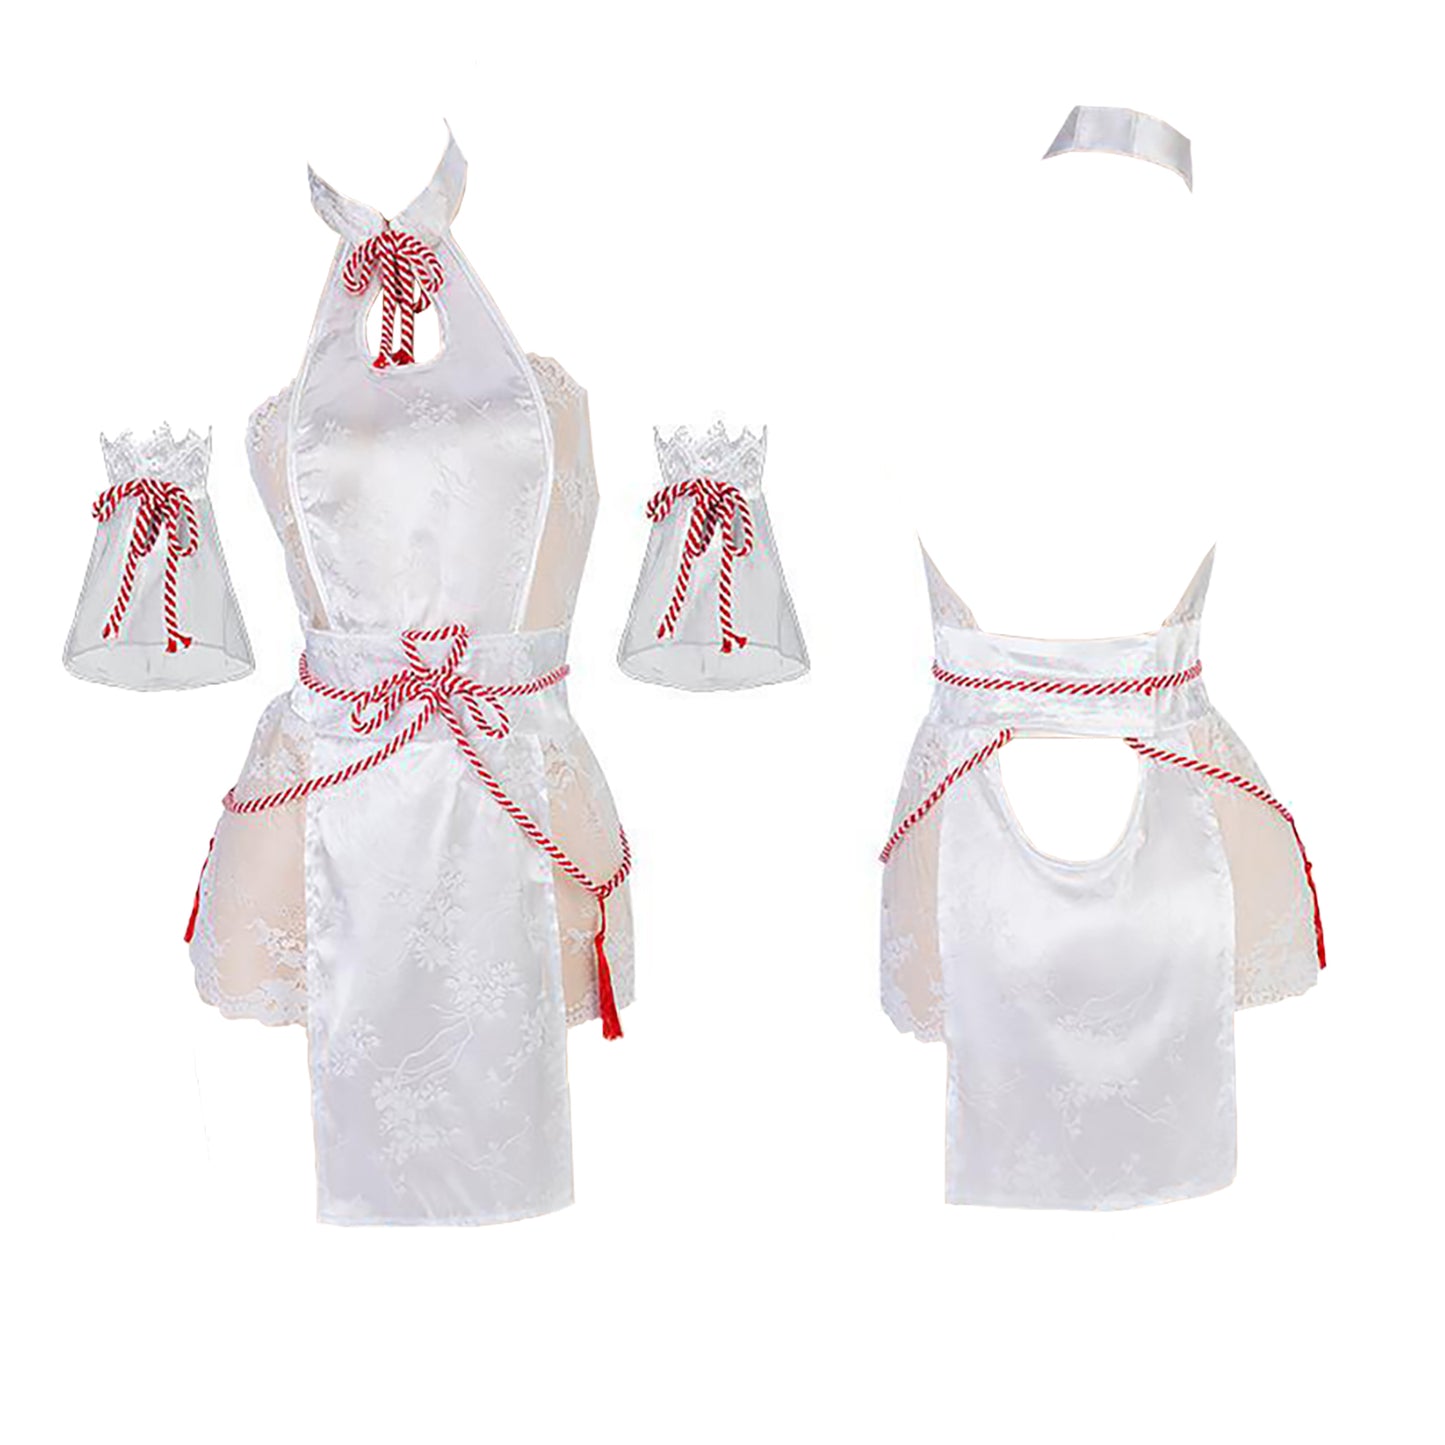 Yomorio Sexy Lace Chinese Style Lingerie Cosplay Costume White Backless Anime Dress